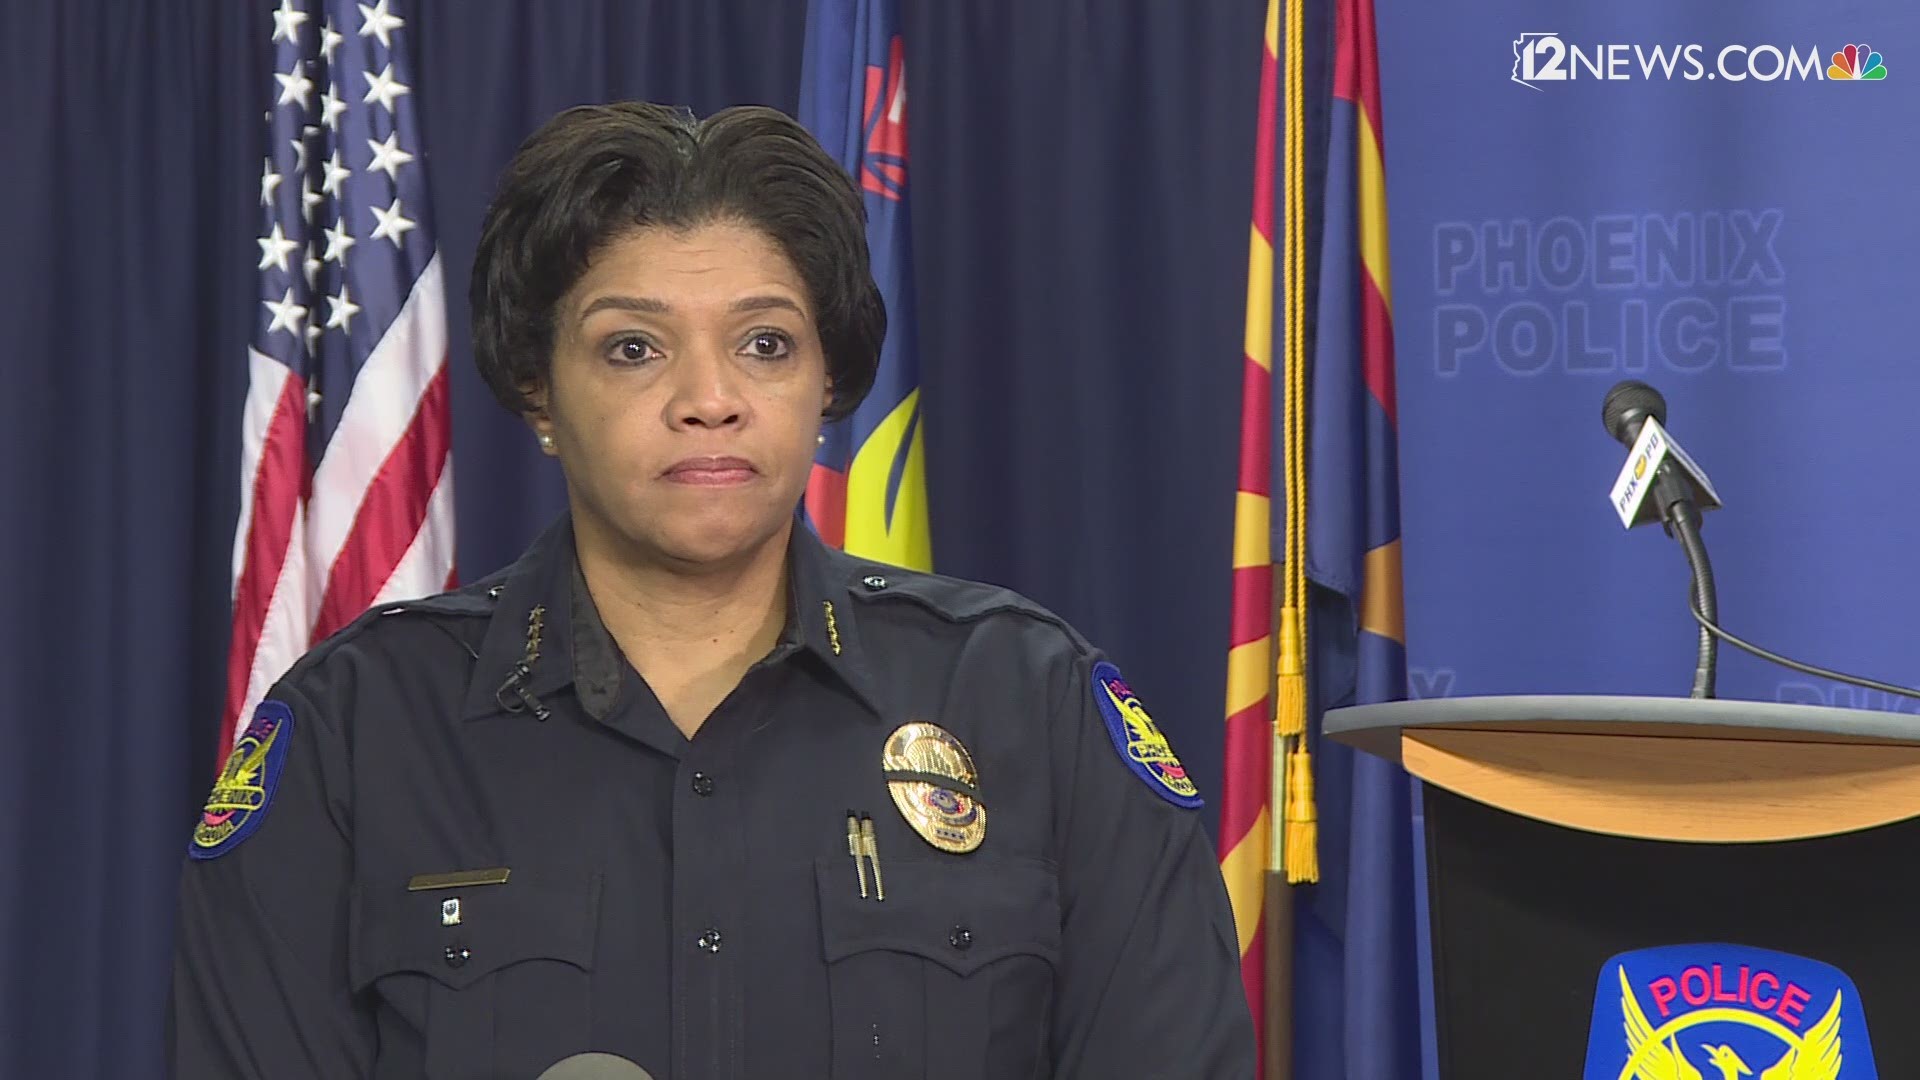 James Garcia was shot and killed by Phoenix police officers in a driveway on July 4. Police Chief Jeri Williams talks about the investigation.